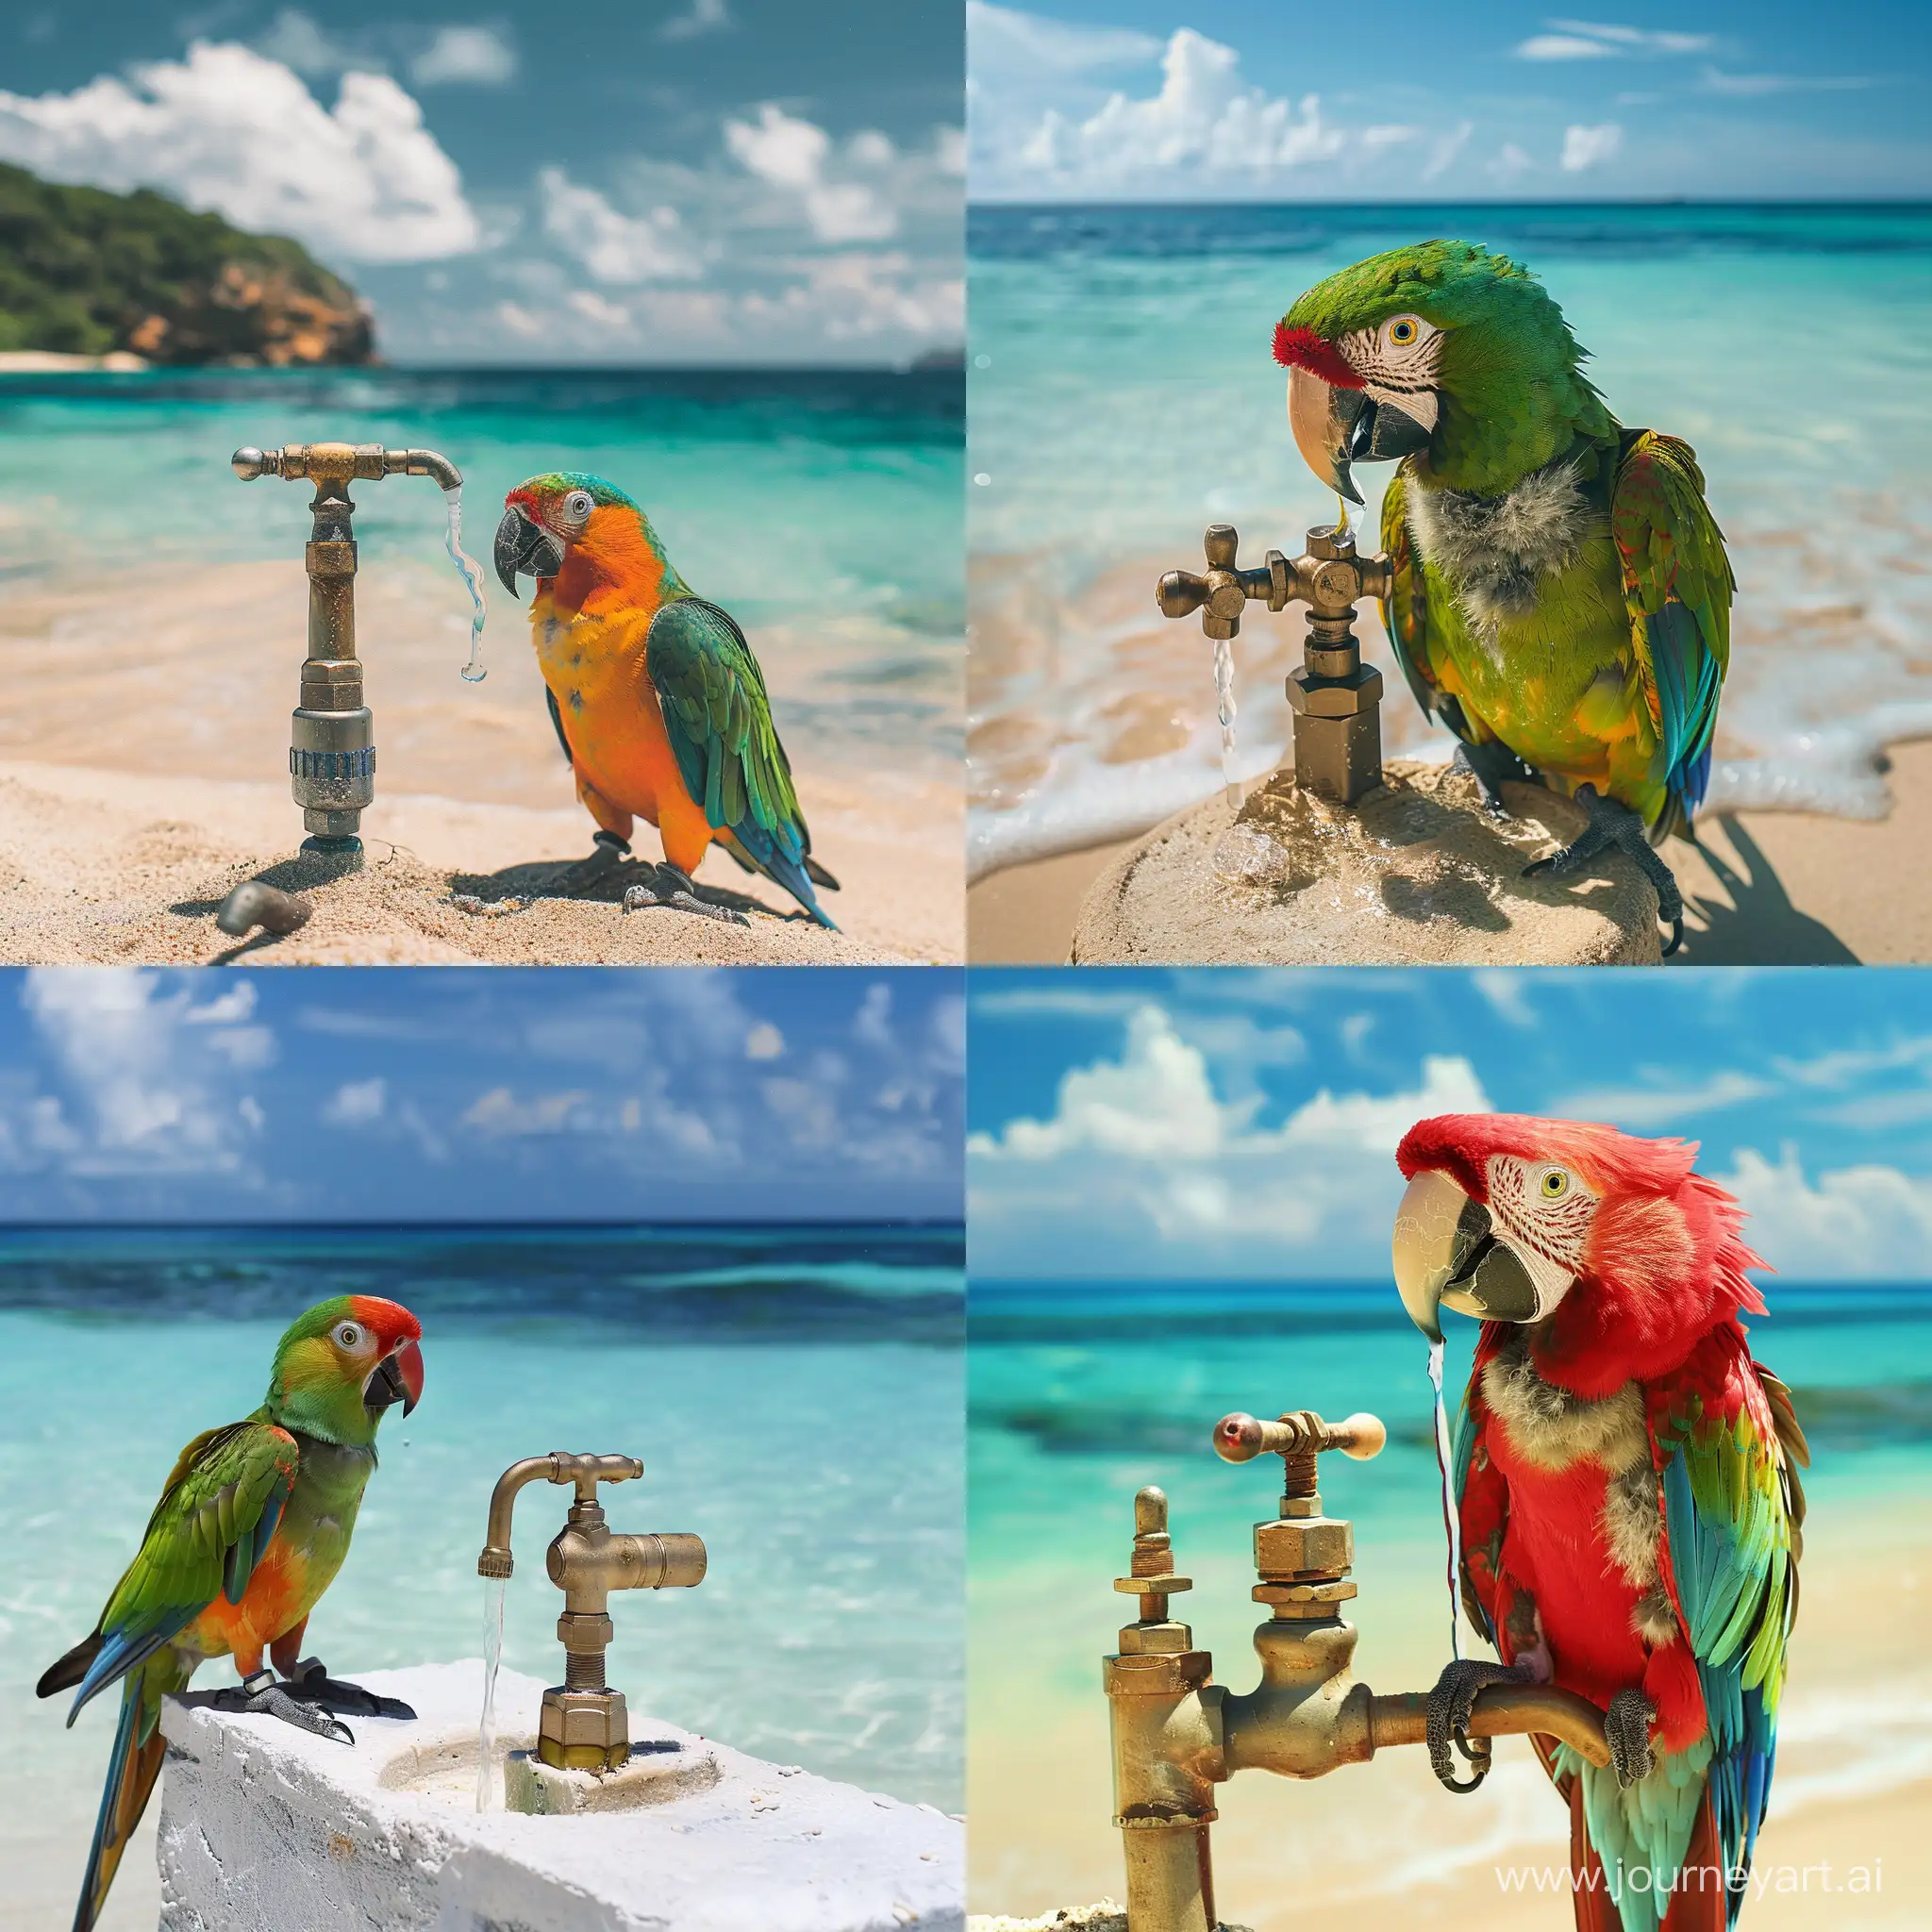 Parrot with a water faucet on the beach